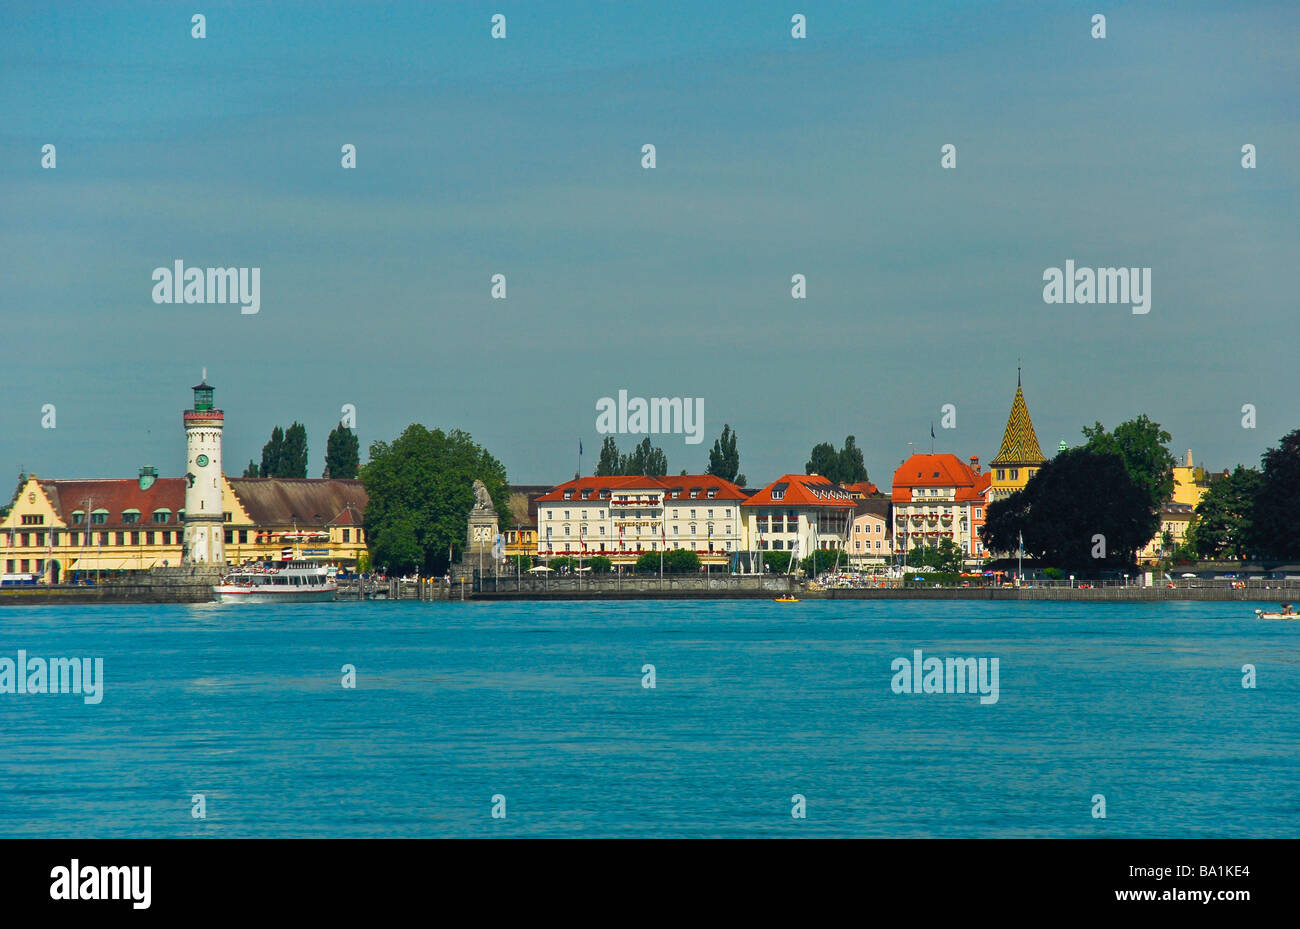 Lindau old town and harbor entrance with ferryboat Lake Constance Germany | Lindau Altstadt Hafen und Fähre Bodensee Stock Photo